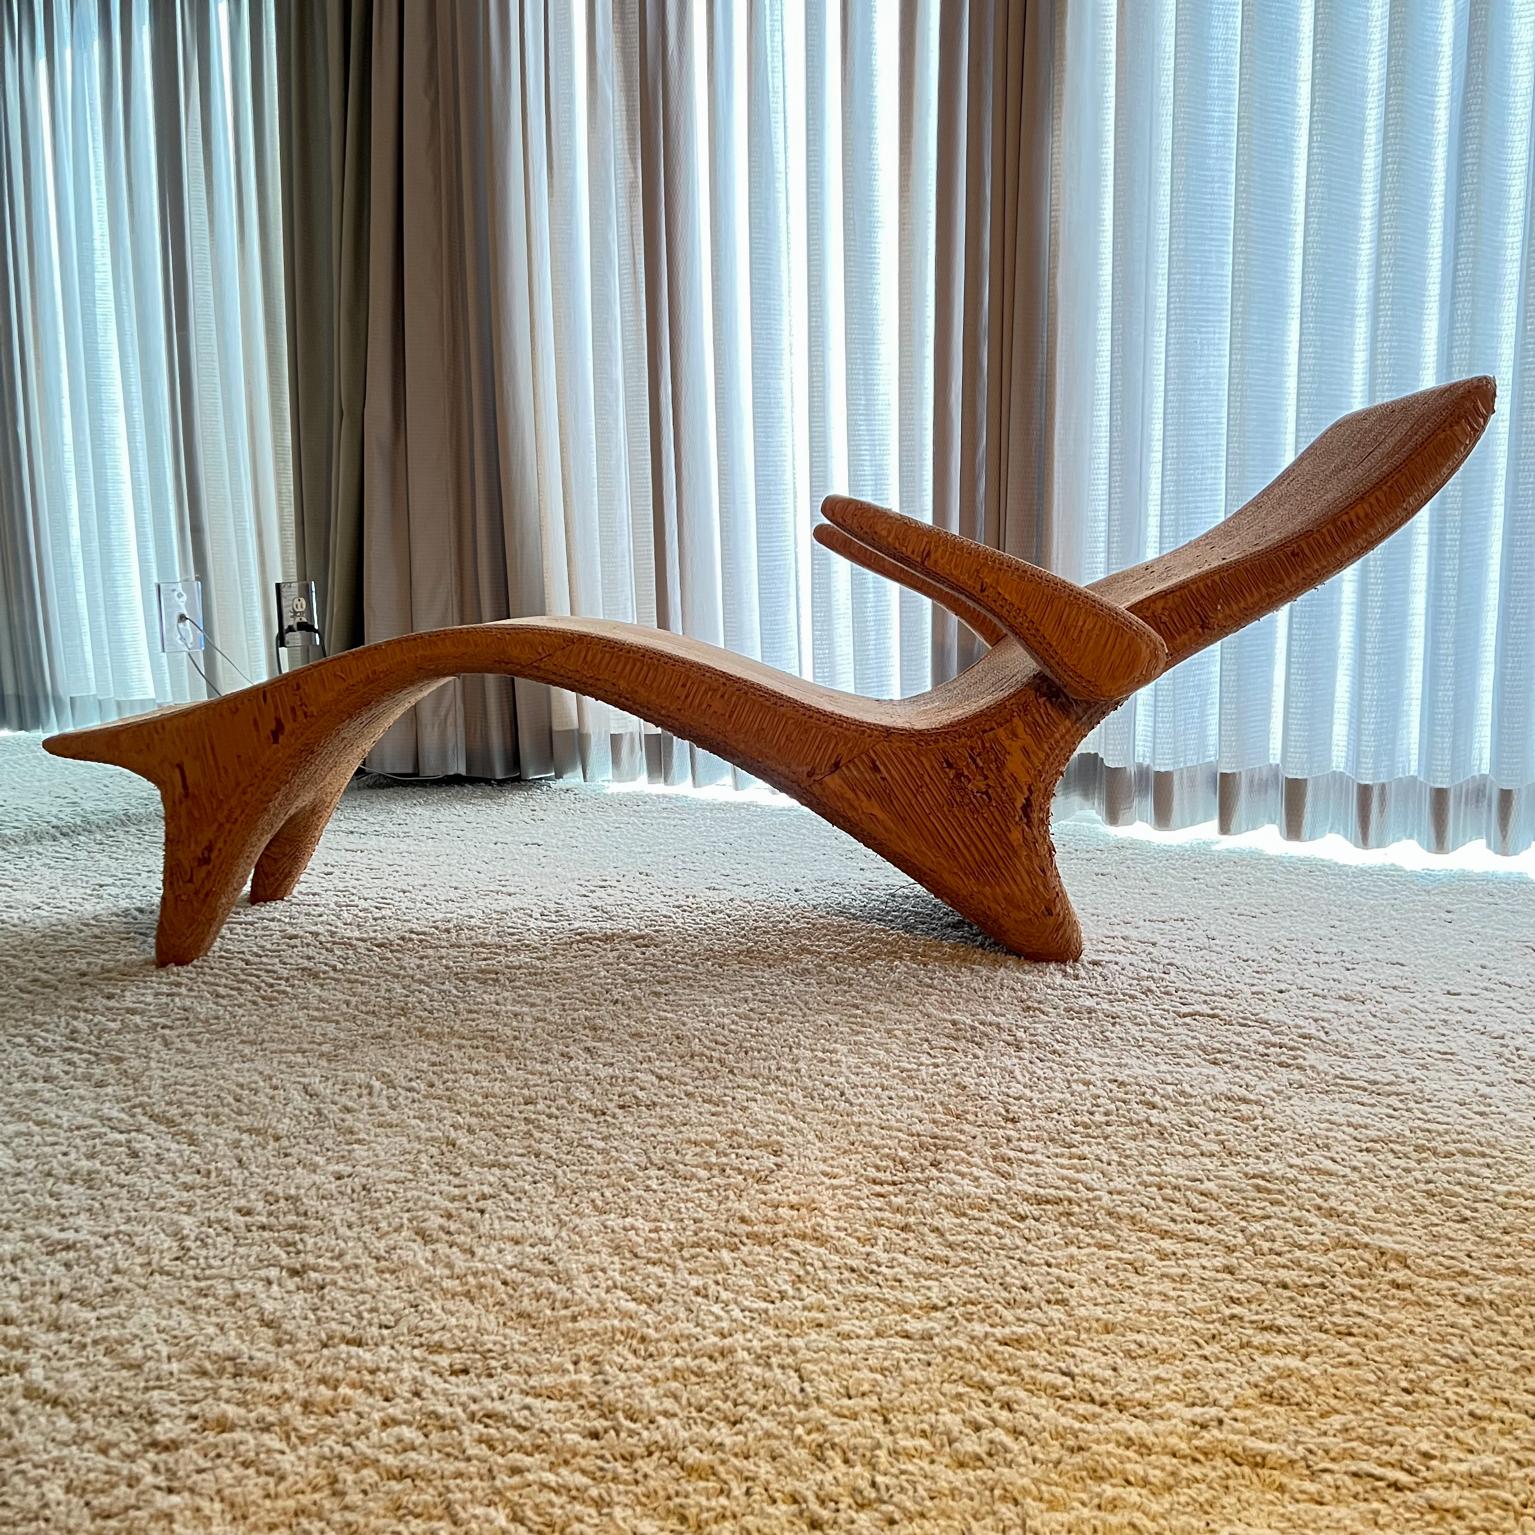  1970s Style Frank Gehry Chaise Lounge LA Art Chair  In Good Condition For Sale In Chula Vista, CA